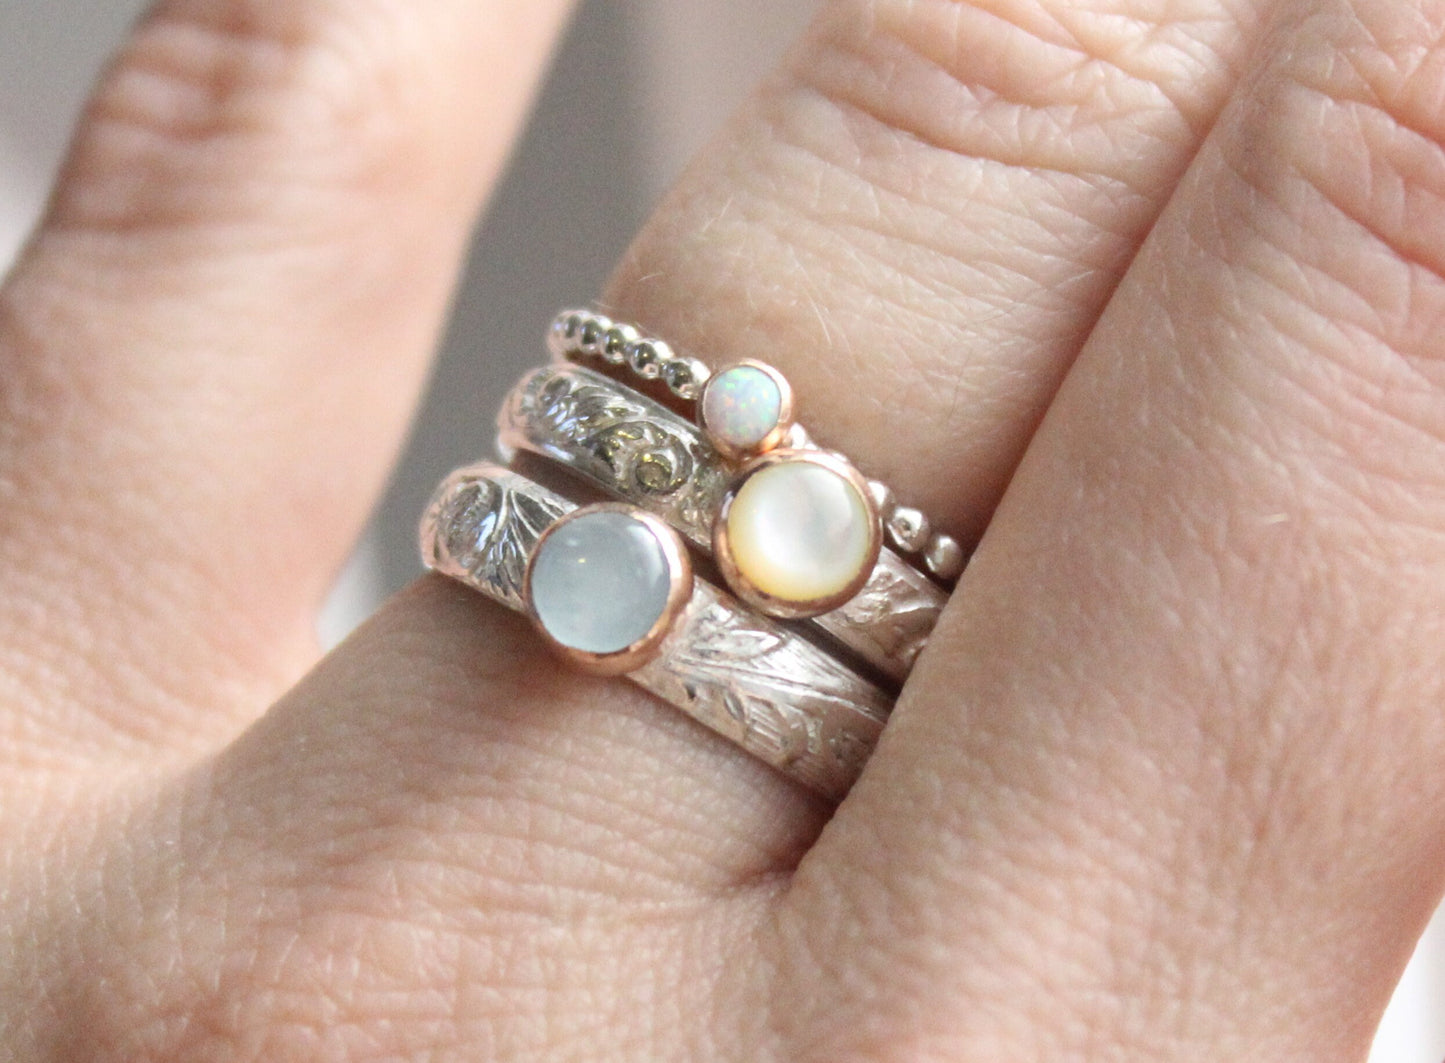 Gemstone Stacking Ring Set // Mother of Pearl Opal and Aquamarine Rings // Sterling Silver and Rose Gold Gemstone Rings // Mother's Ring Set